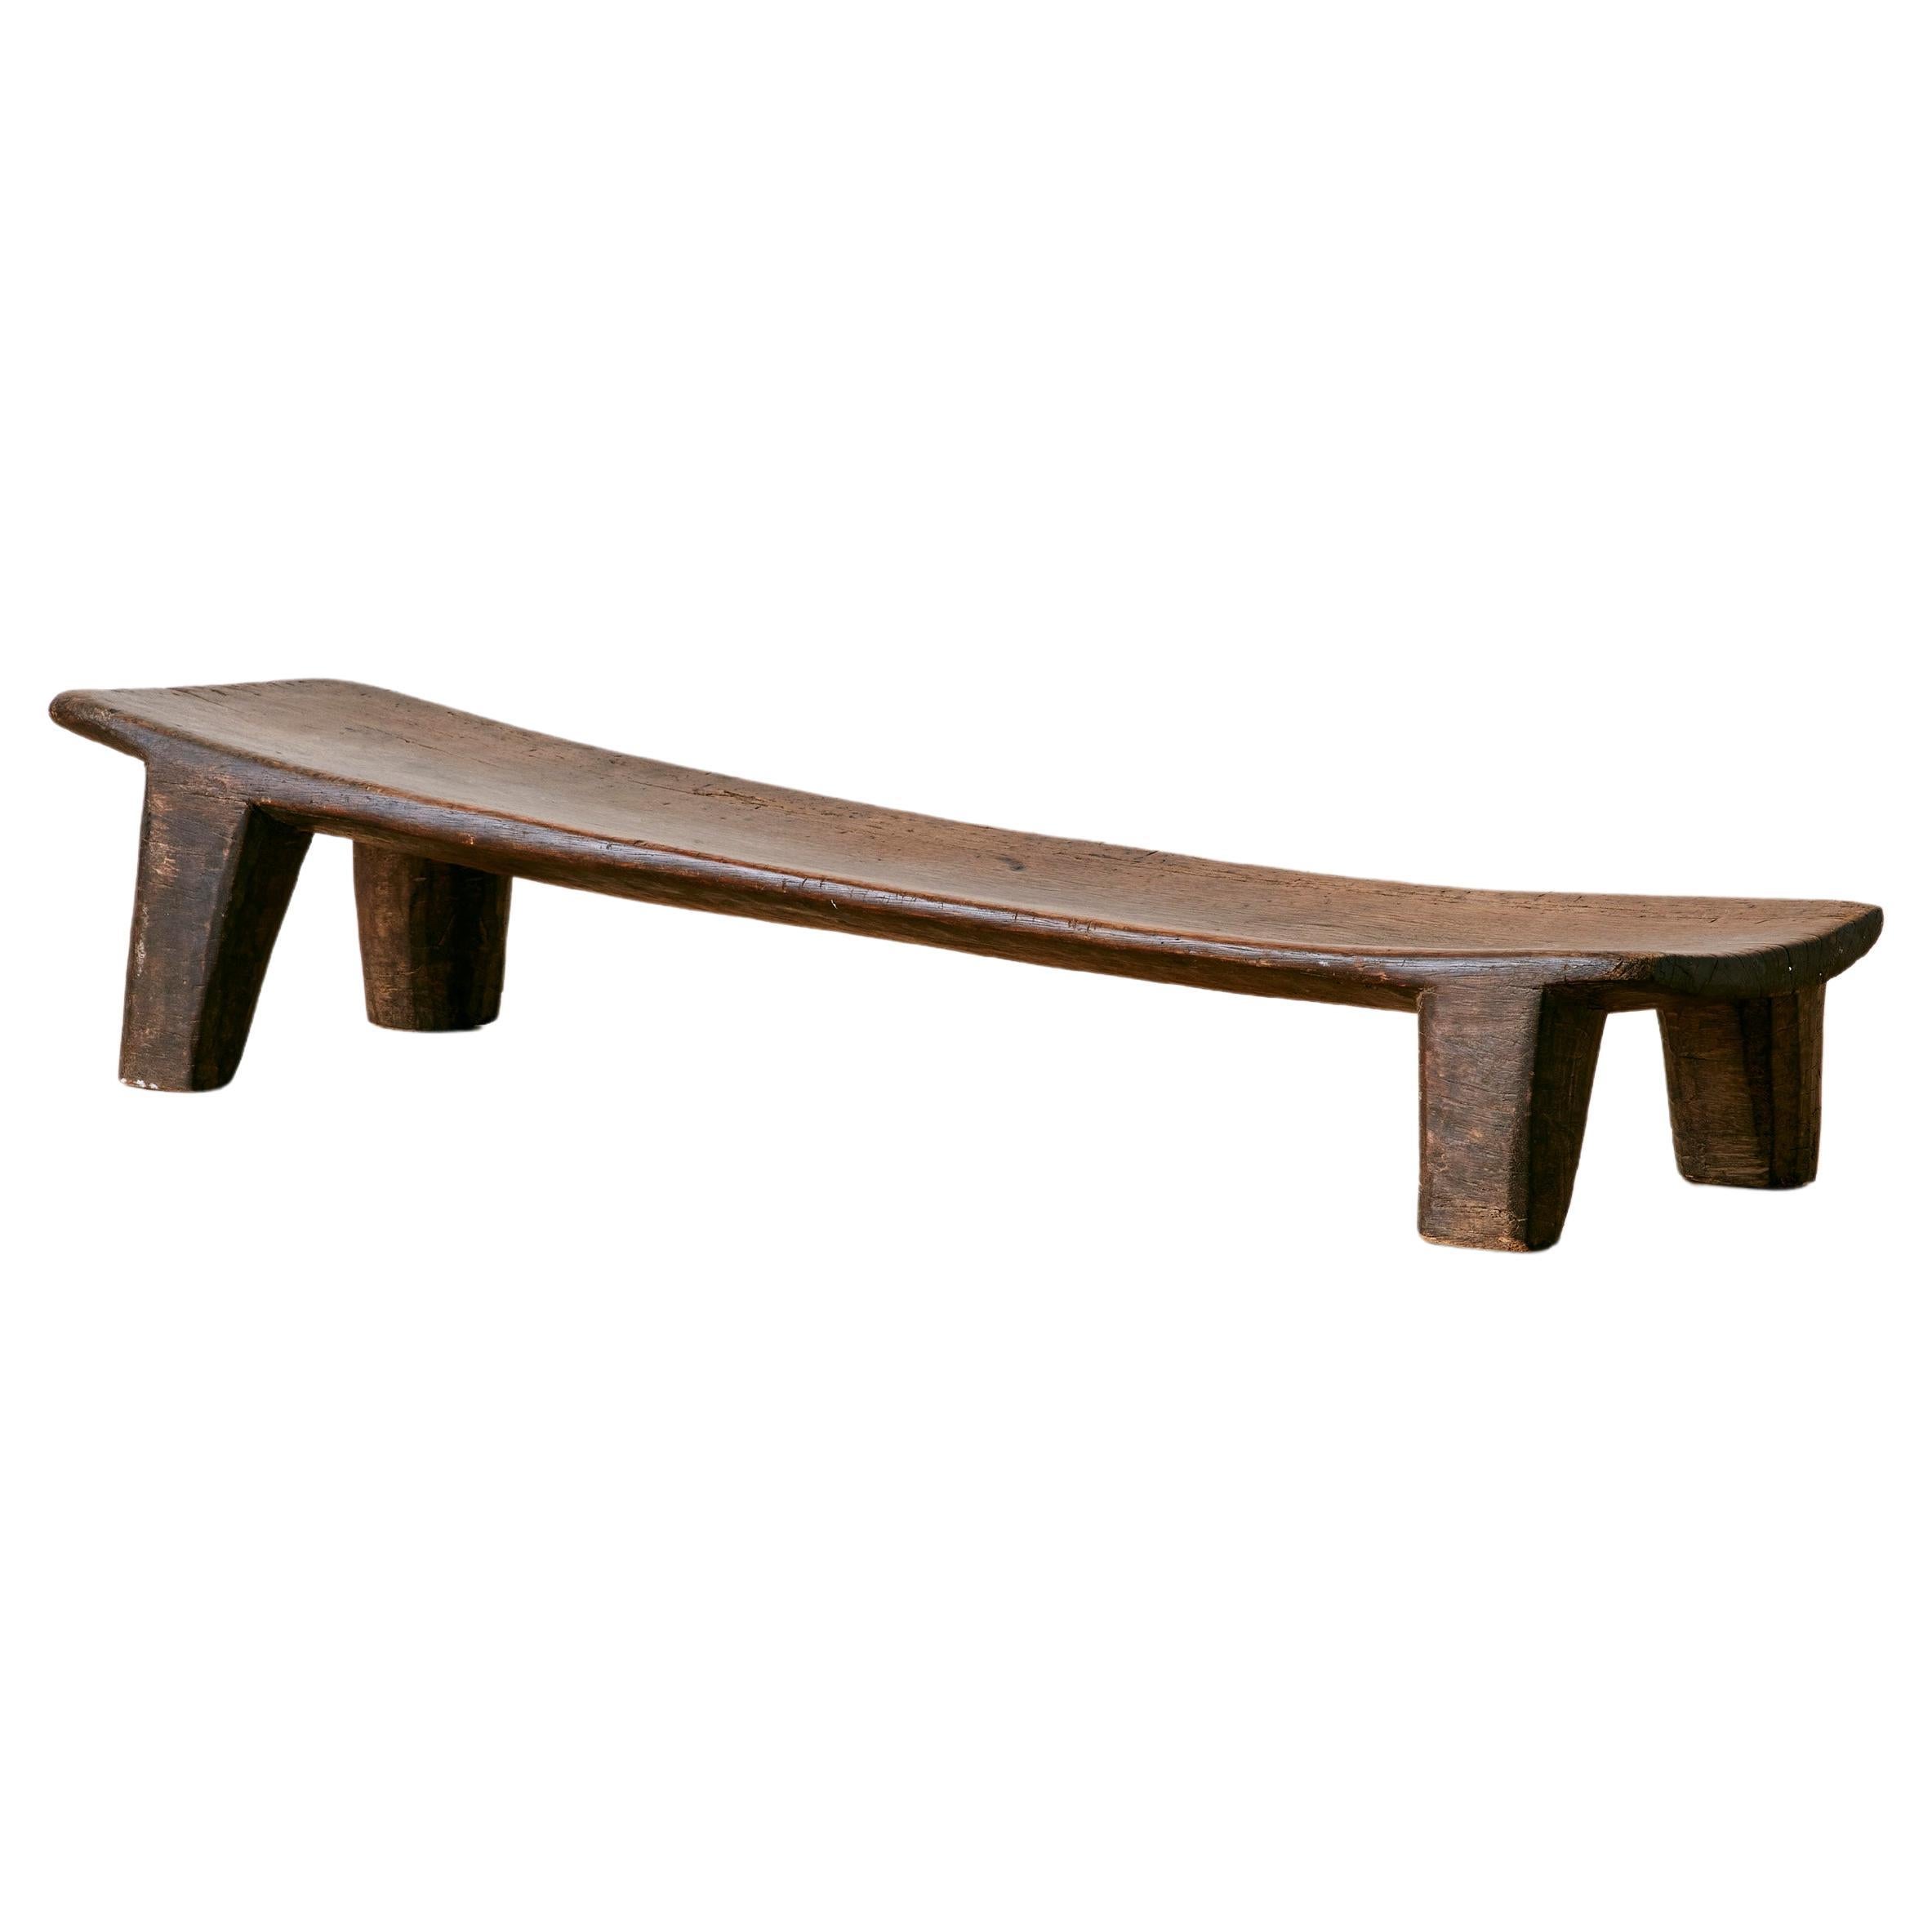 Low Bench Carved by Senufo Artisans in West Africa